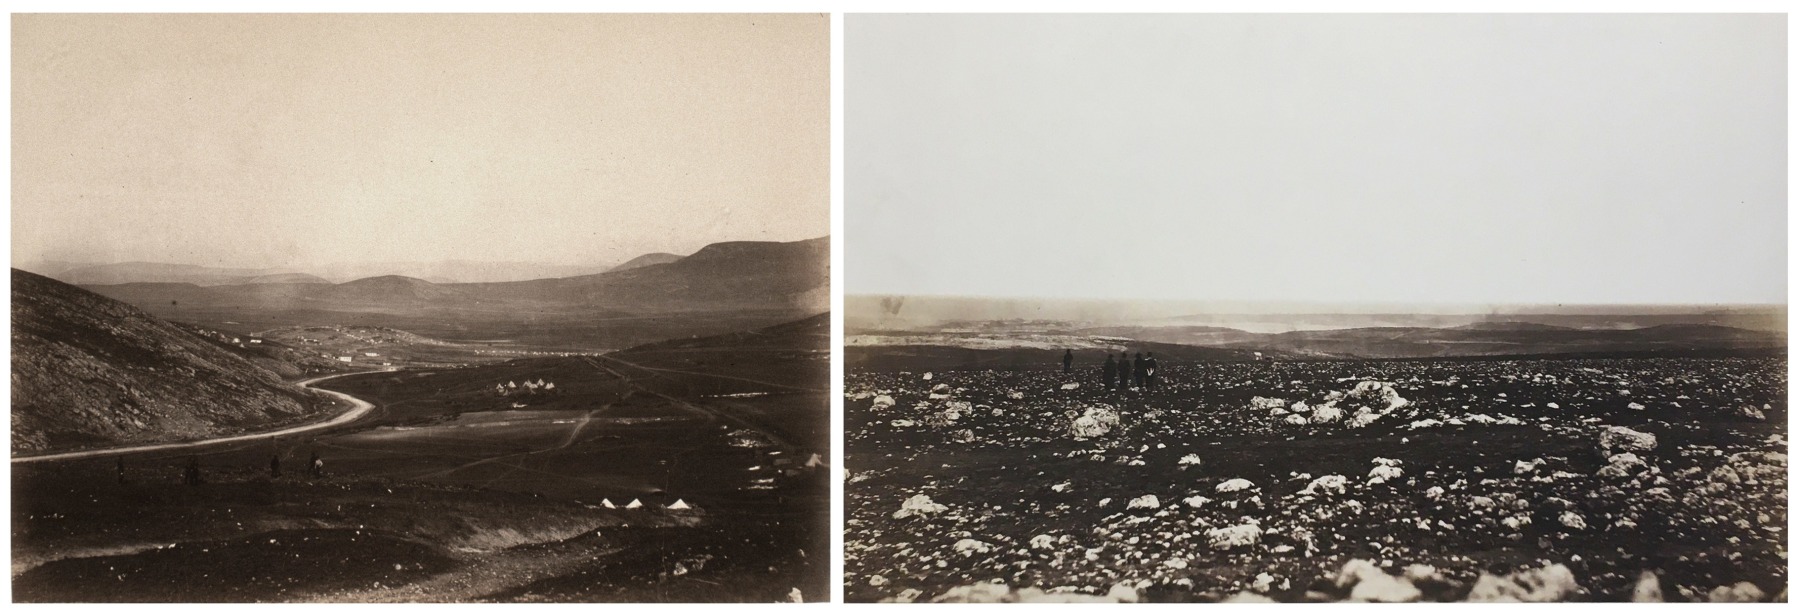 Roger Fenton (English, 1819-1869) Two views in the Crimea, 1855, Salt prints from collodion negatives, 25.3 x 34.9 cm; 22.7 x 35.9 cm